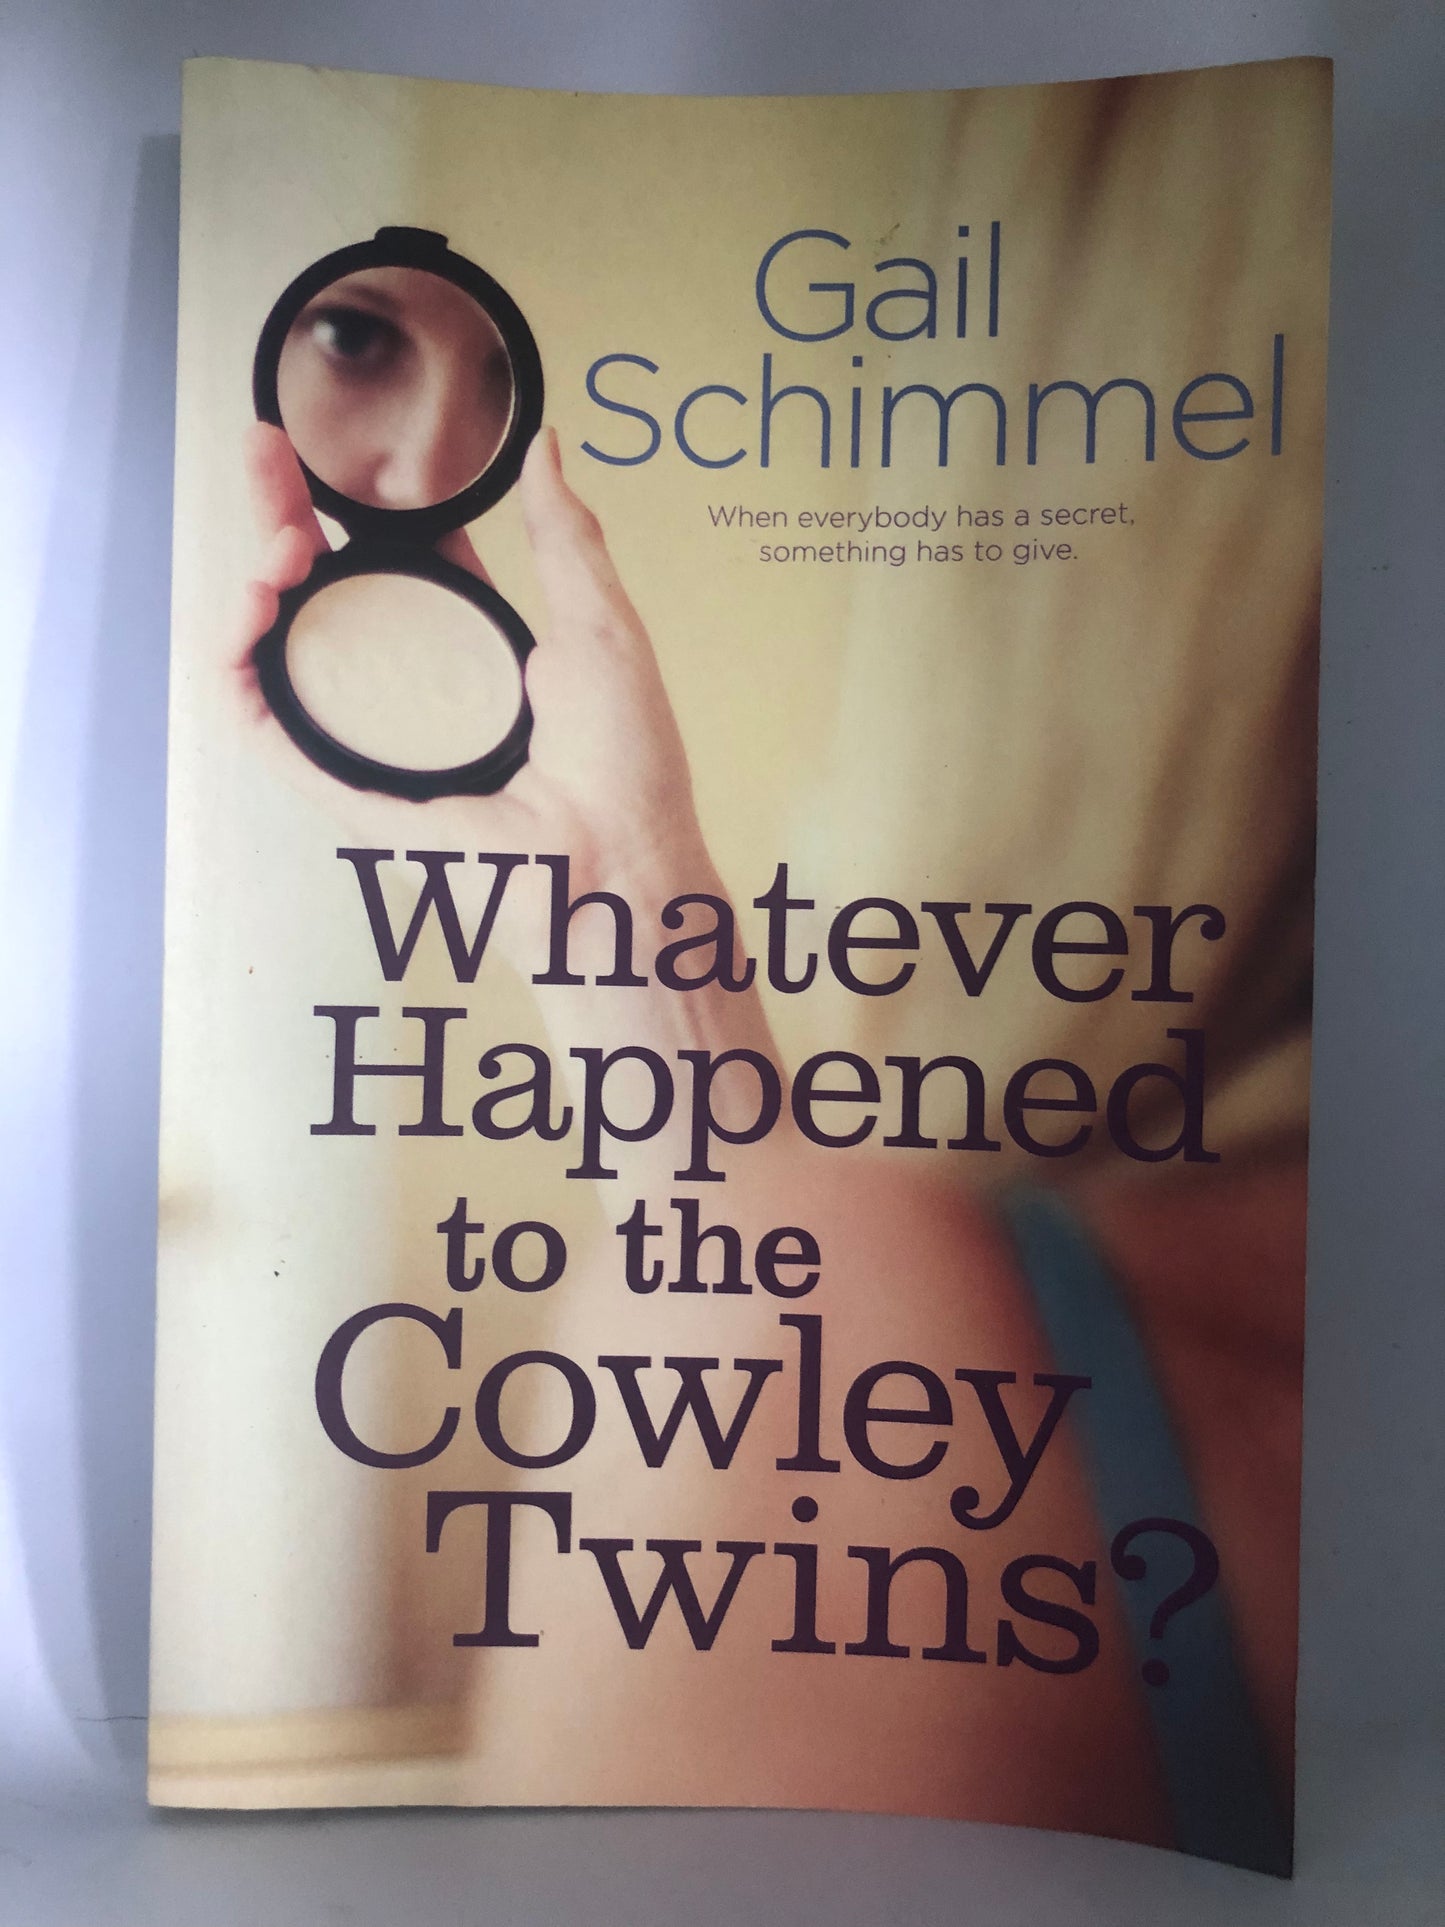 Schimmel, Gail - WHATEVER HAPPENED TO THE COWLEY TWINS?